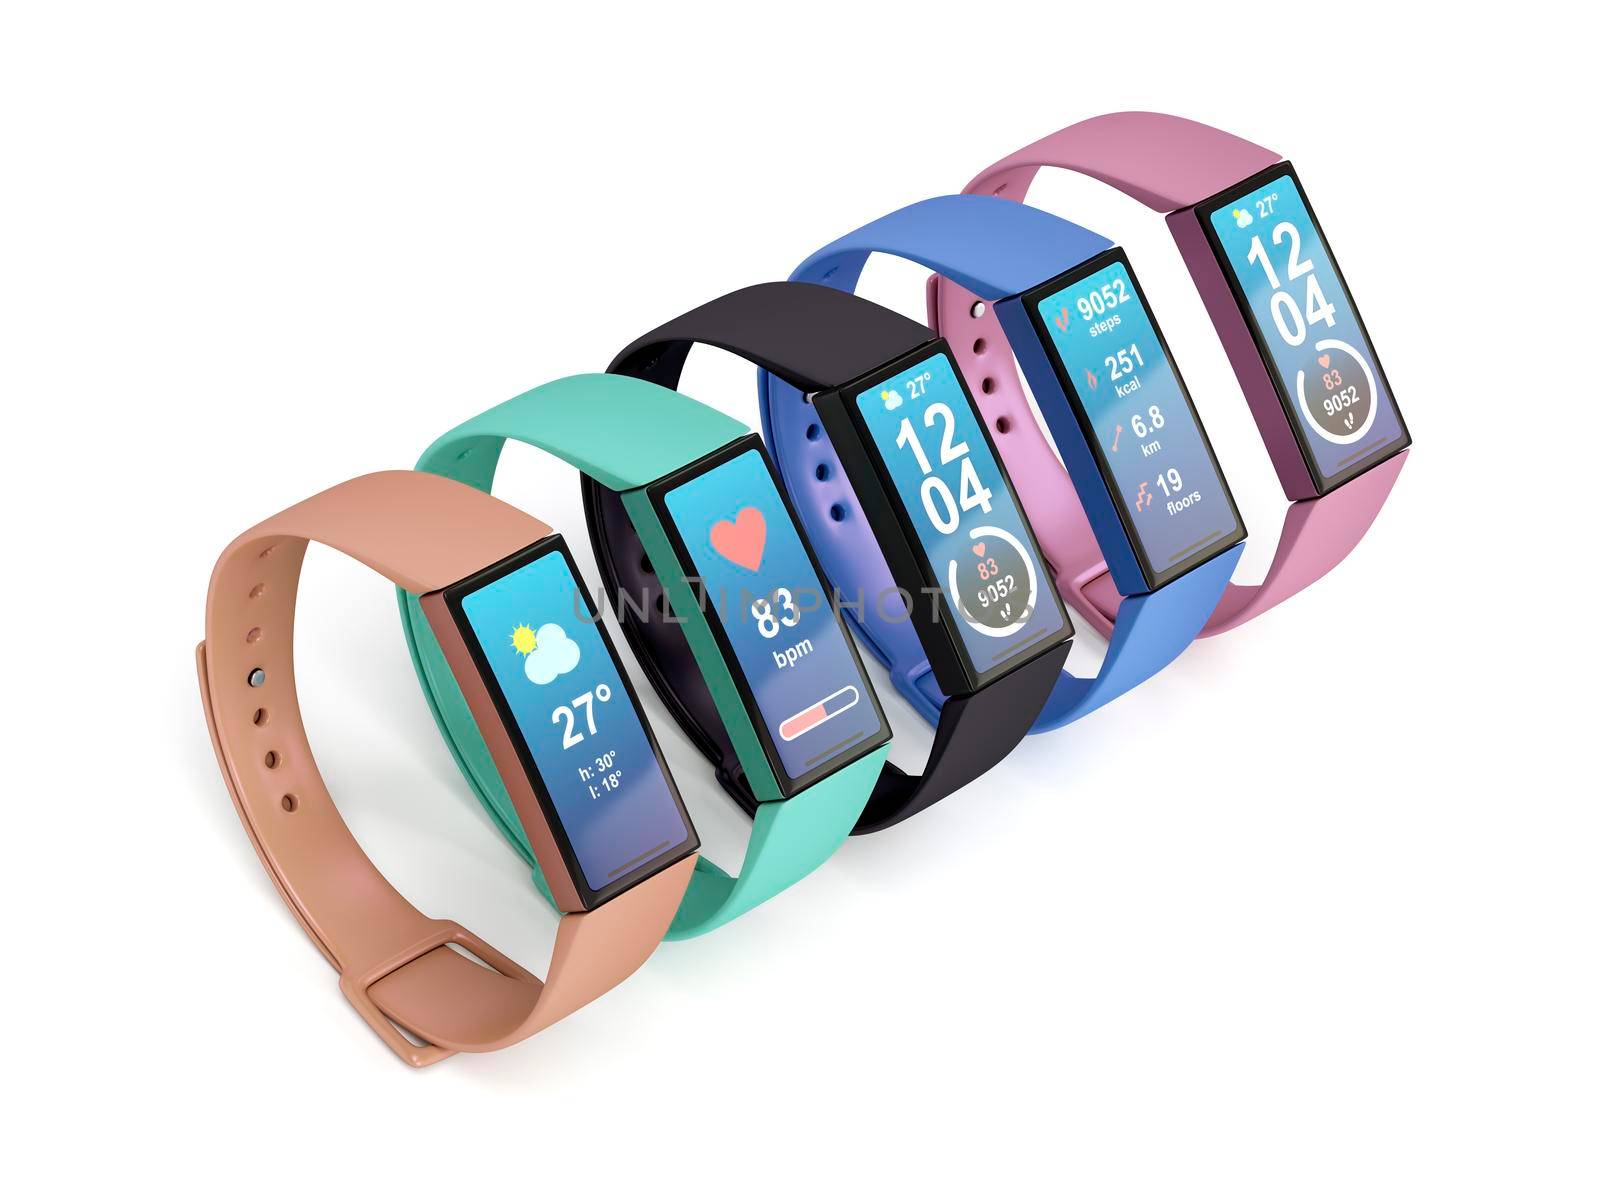 Five colorful fitness trackers
 by magraphics